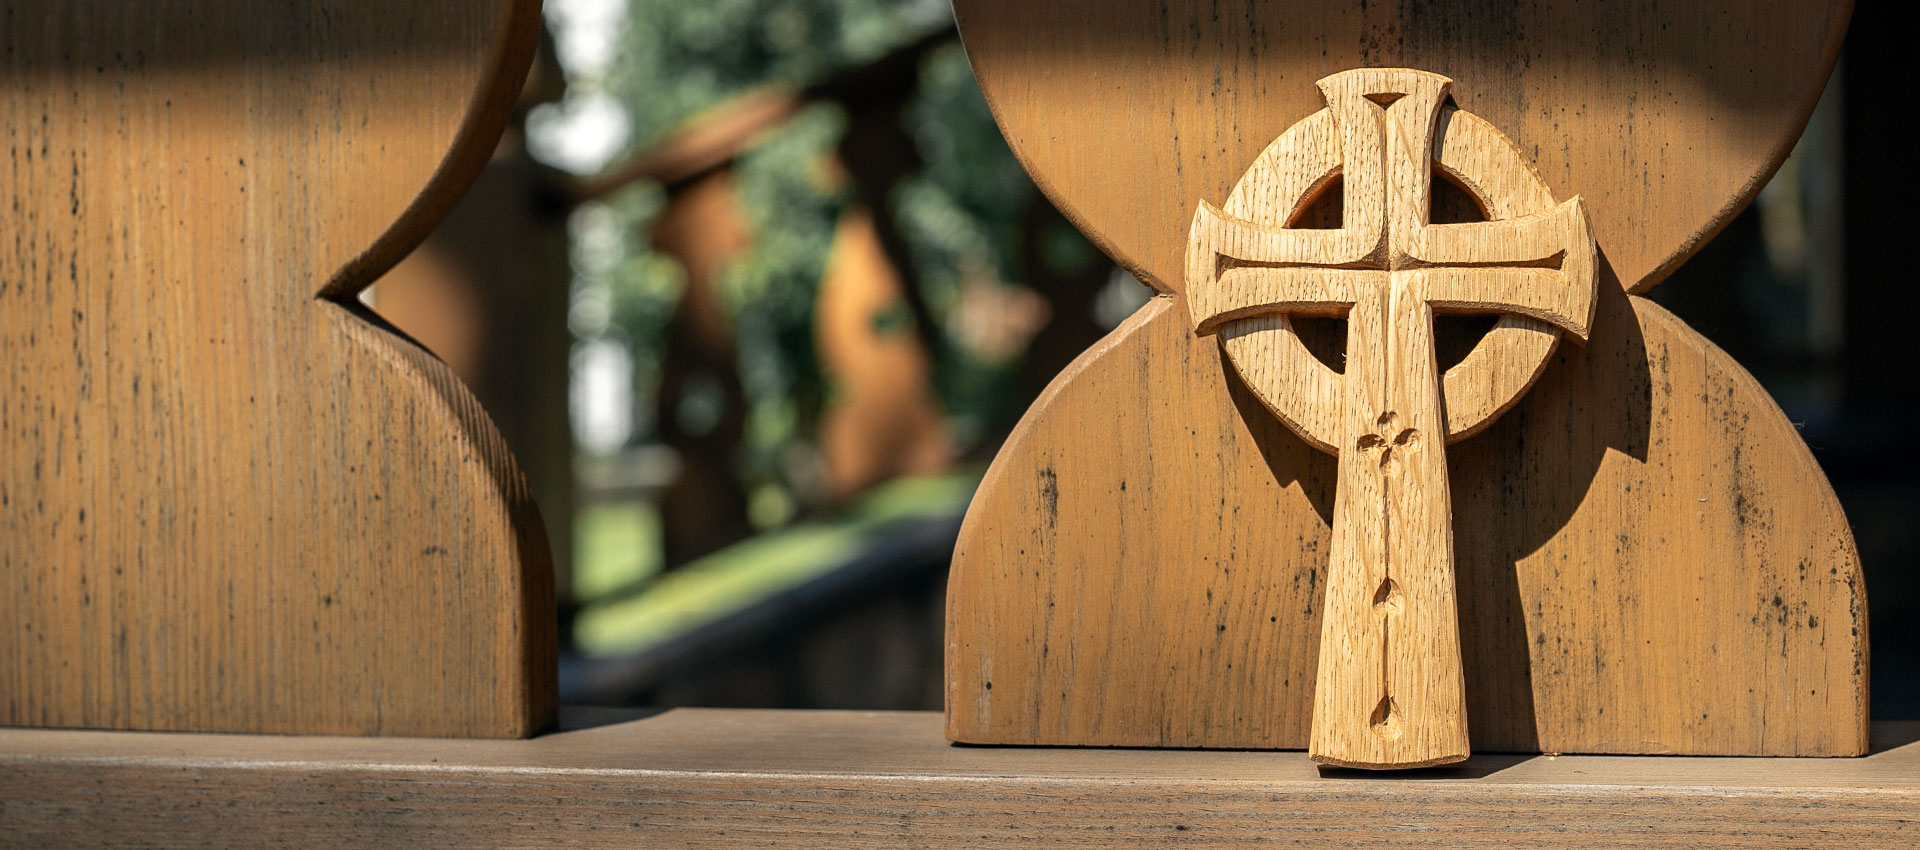 Celtic and Other Carved Crosses